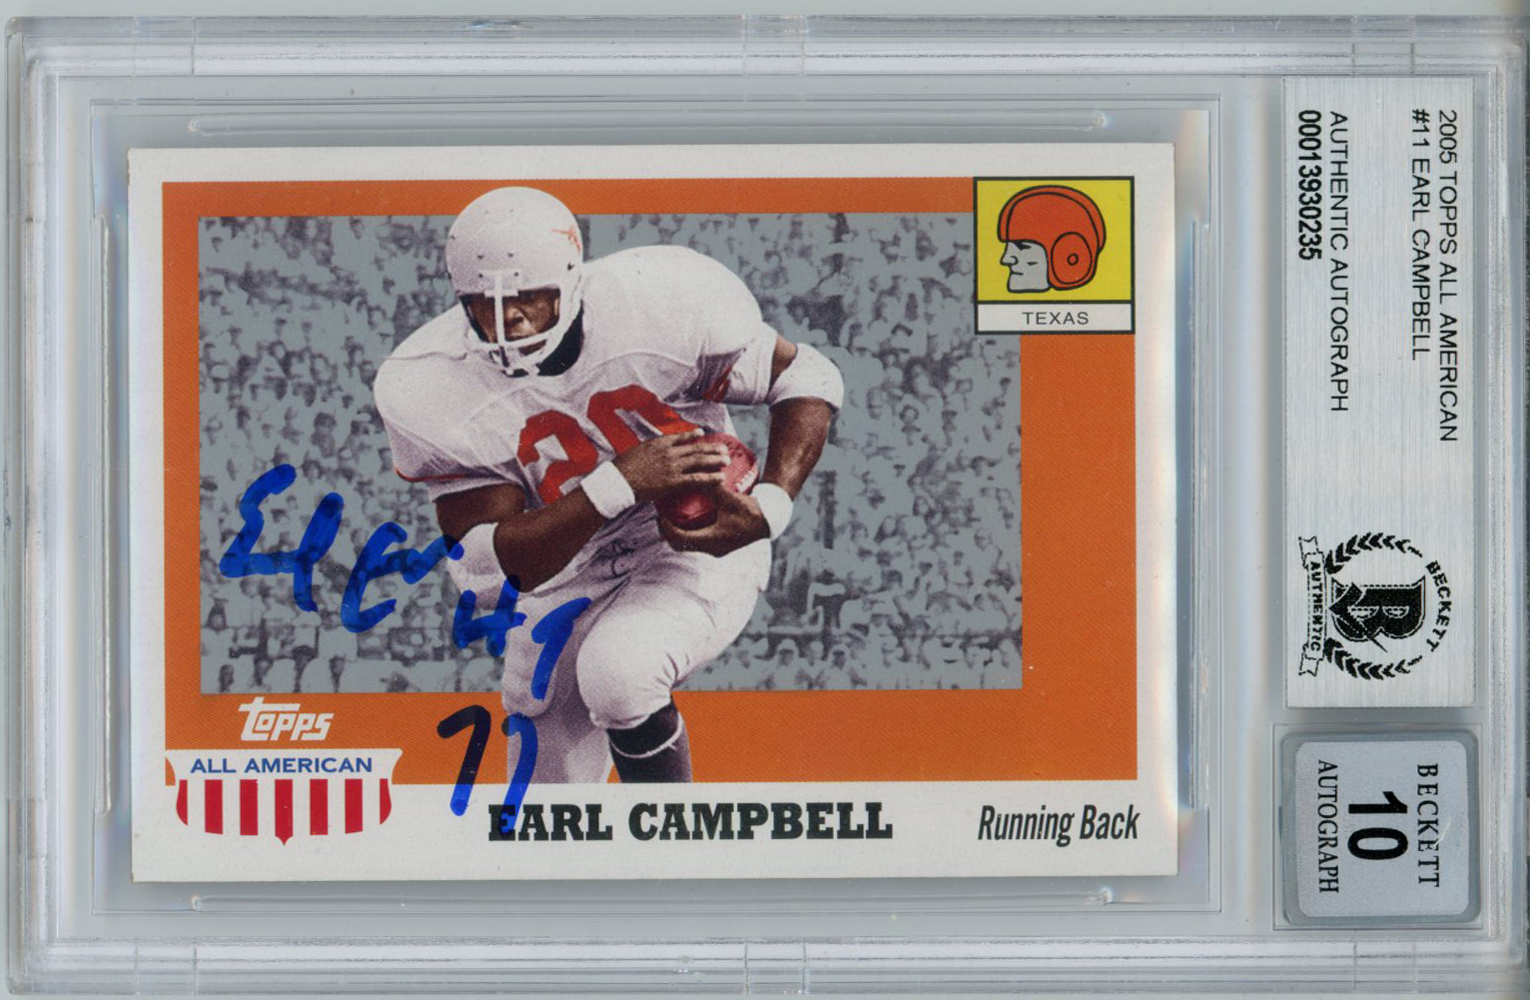 Earl Campbell Signed 2005 Topps All American Trading Card Beckett Slab